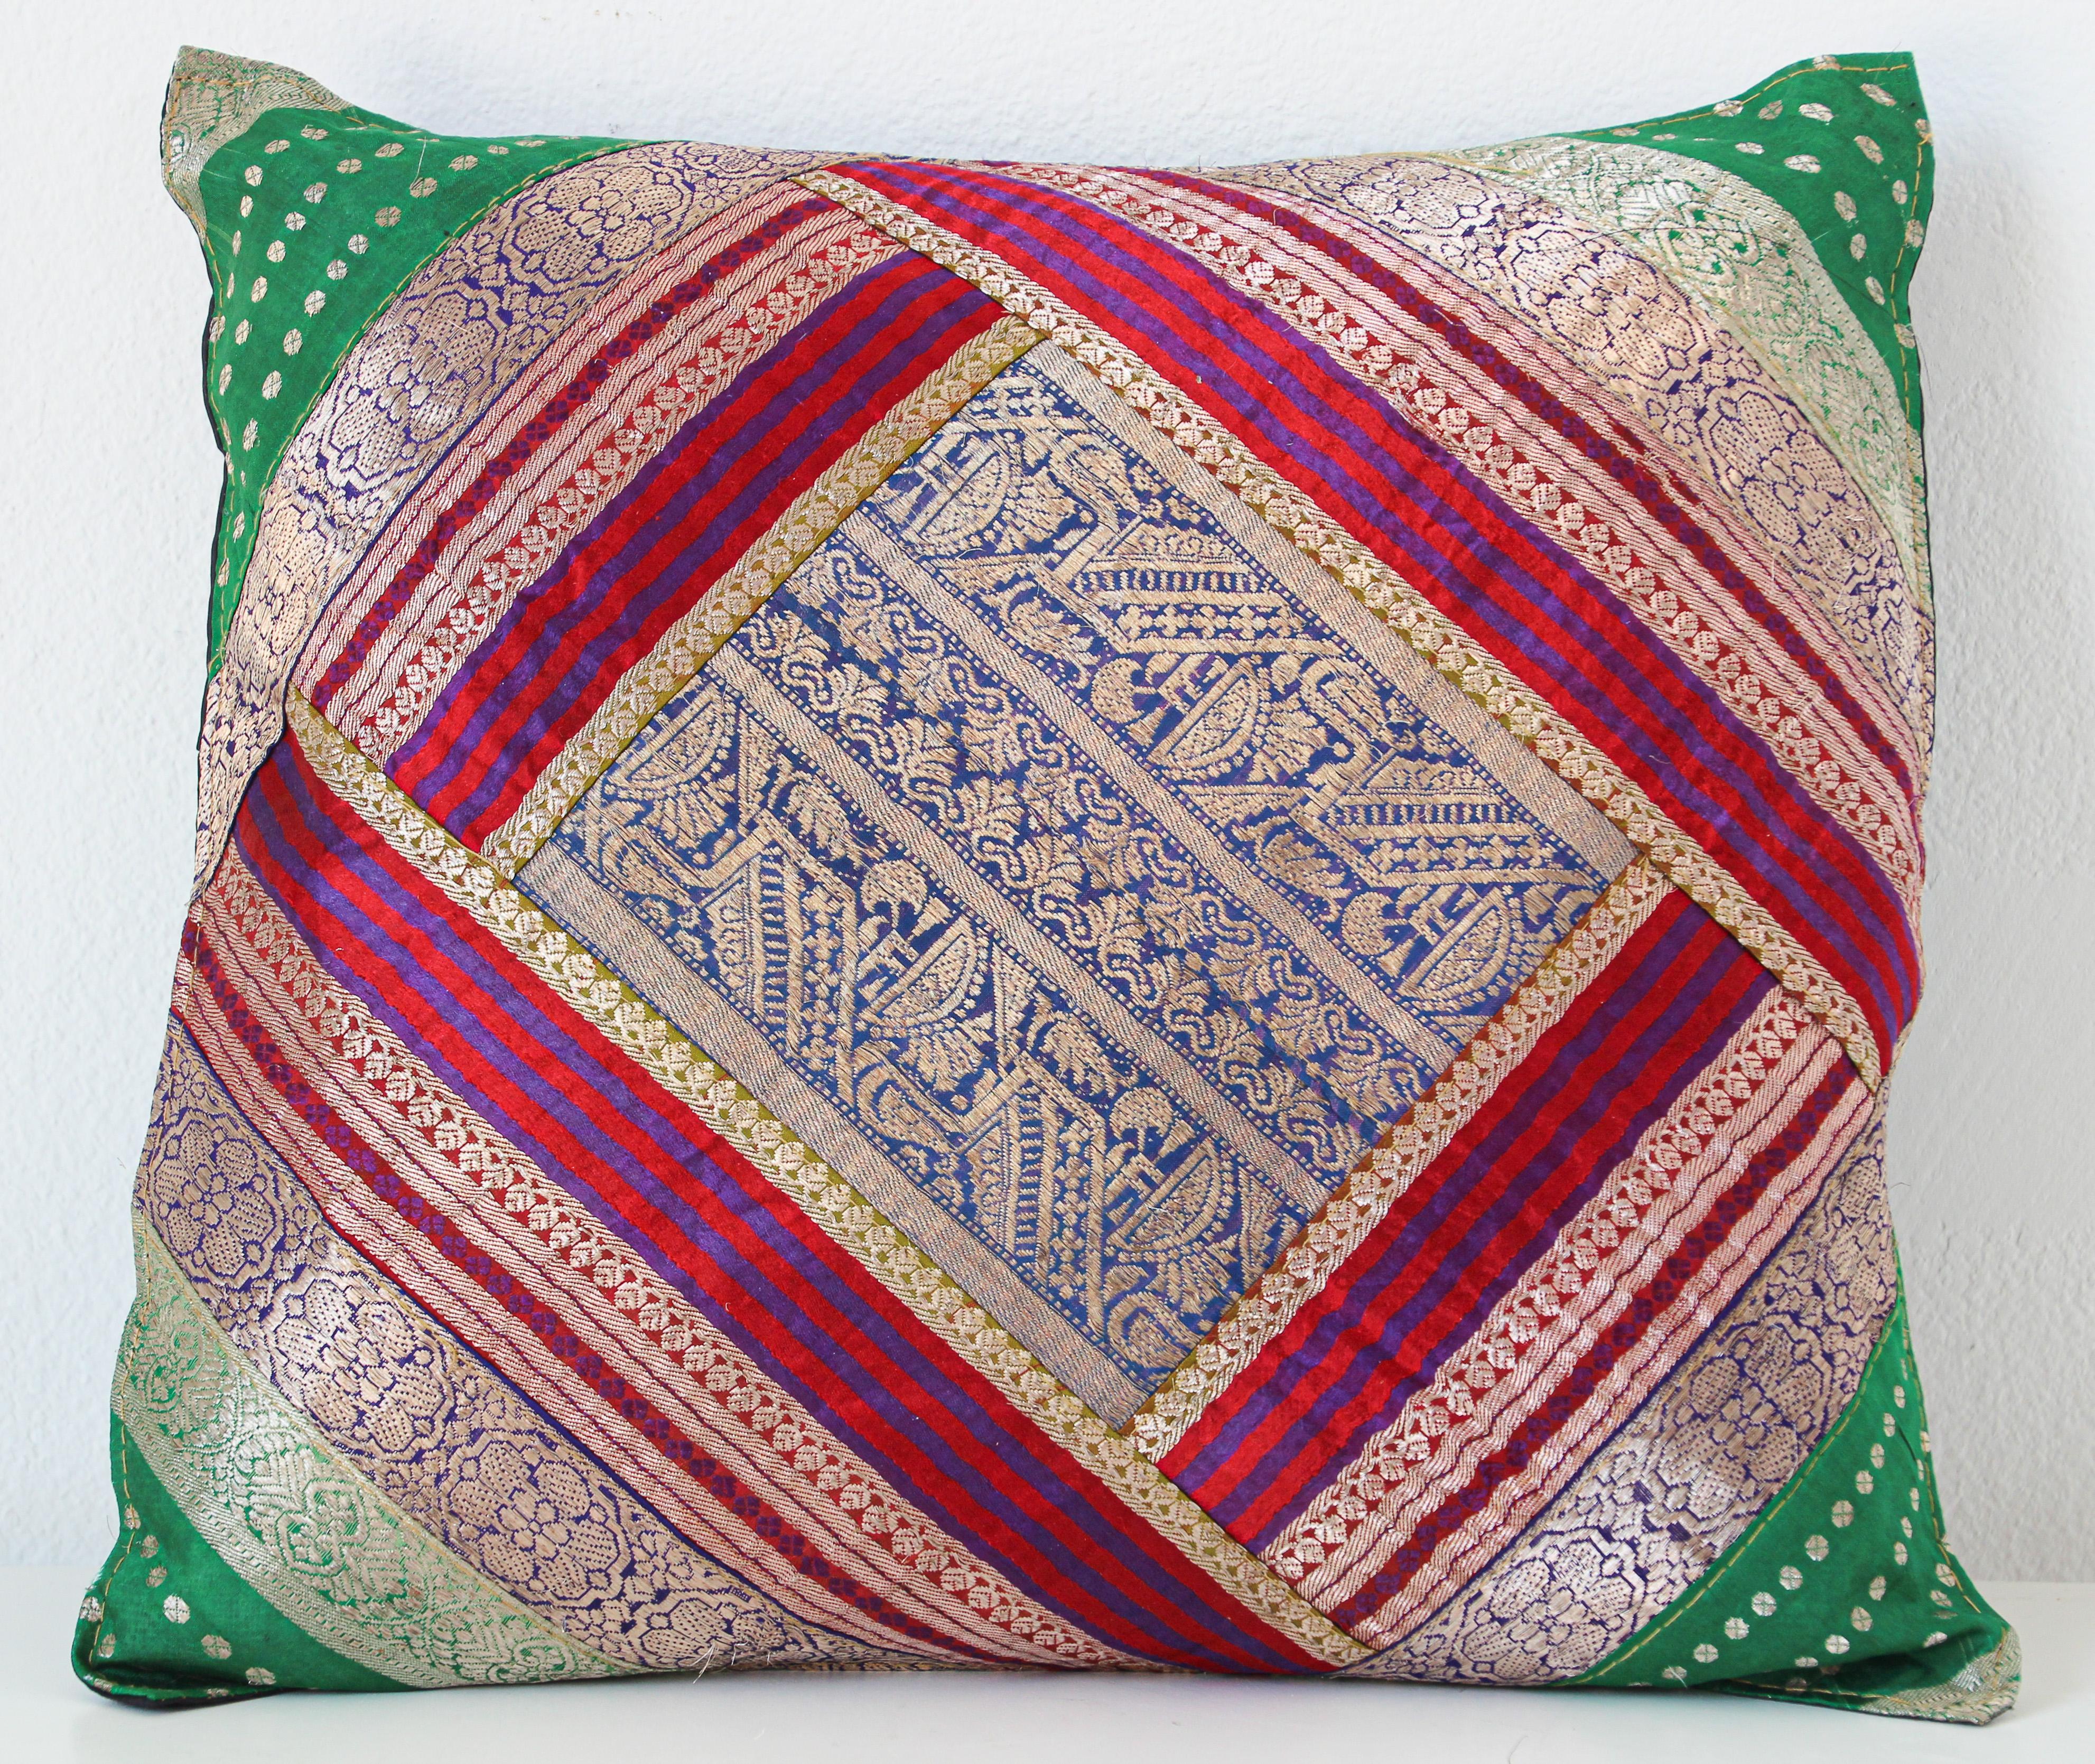 Decorative accent throw pillow made from vintage silk sari borders.
One of a kind silk pillow in blue, green, gold, green, purple with metallic threads silk saris borders.
Handcrafted in India.
We do have multiple in this style, but each one is